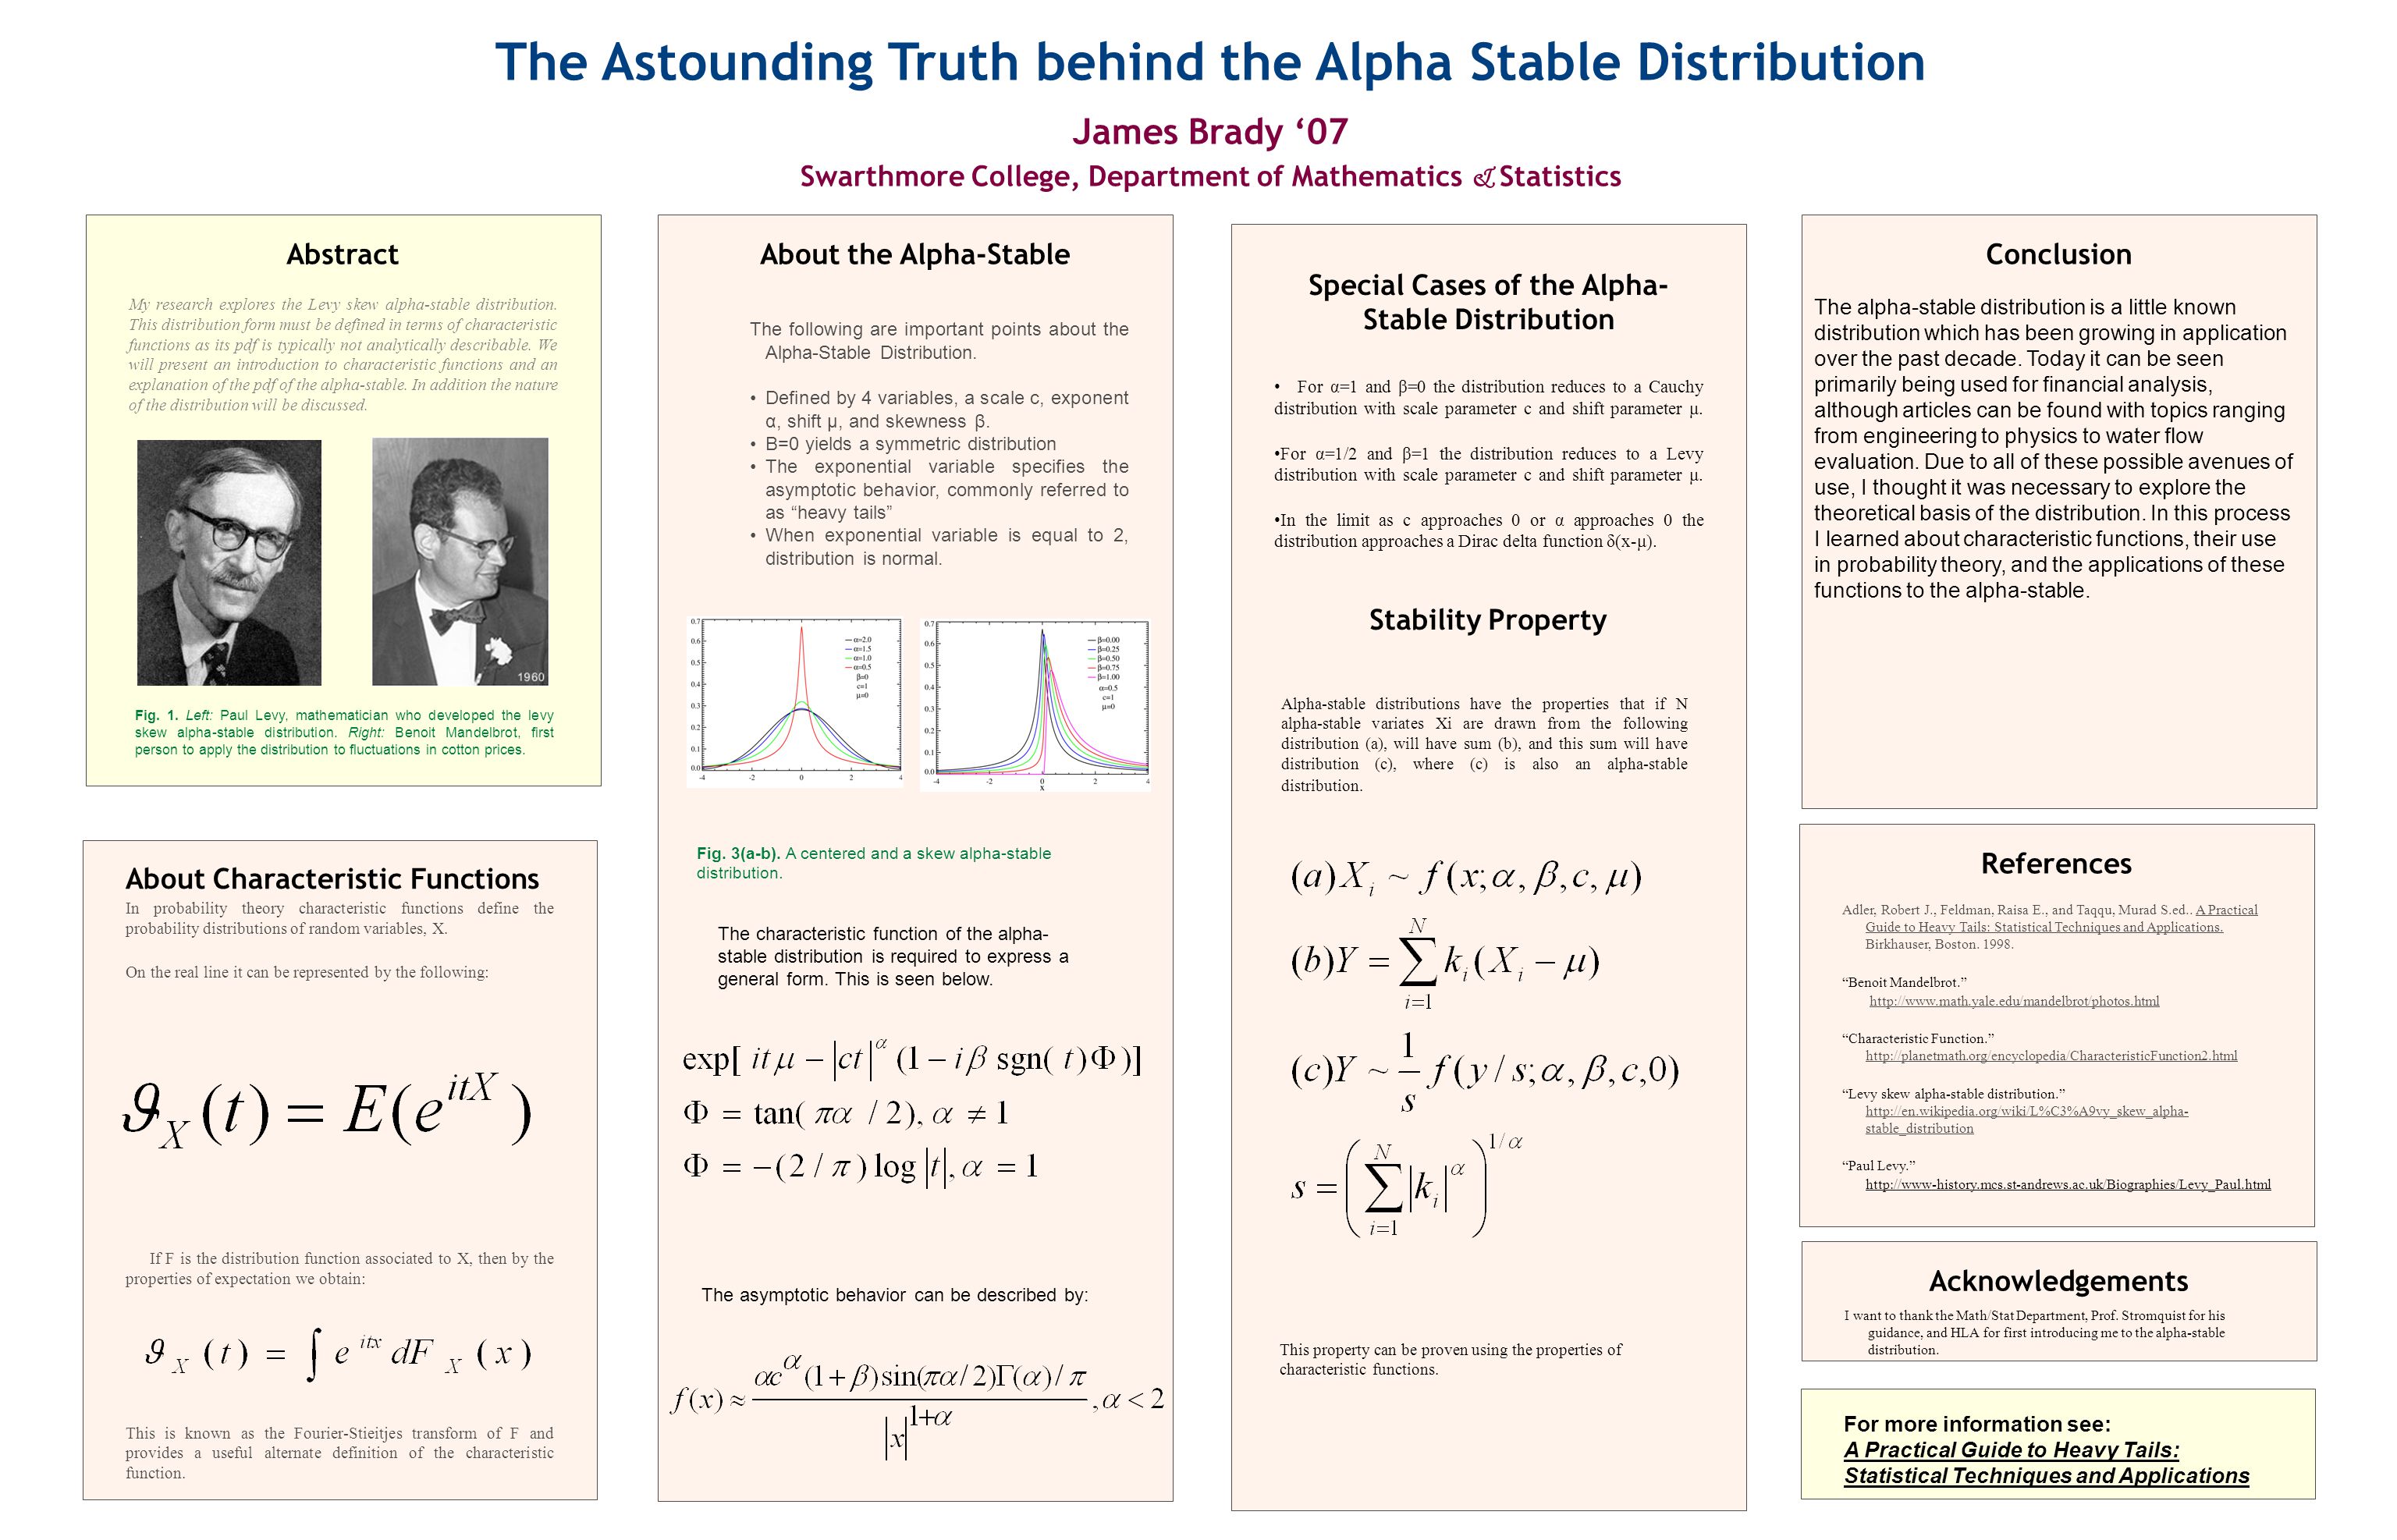 Abstract My research explores the Levy skew alpha-stable distribution. This  distribution form must be defined in terms of characteristic functions as  its. - ppt download